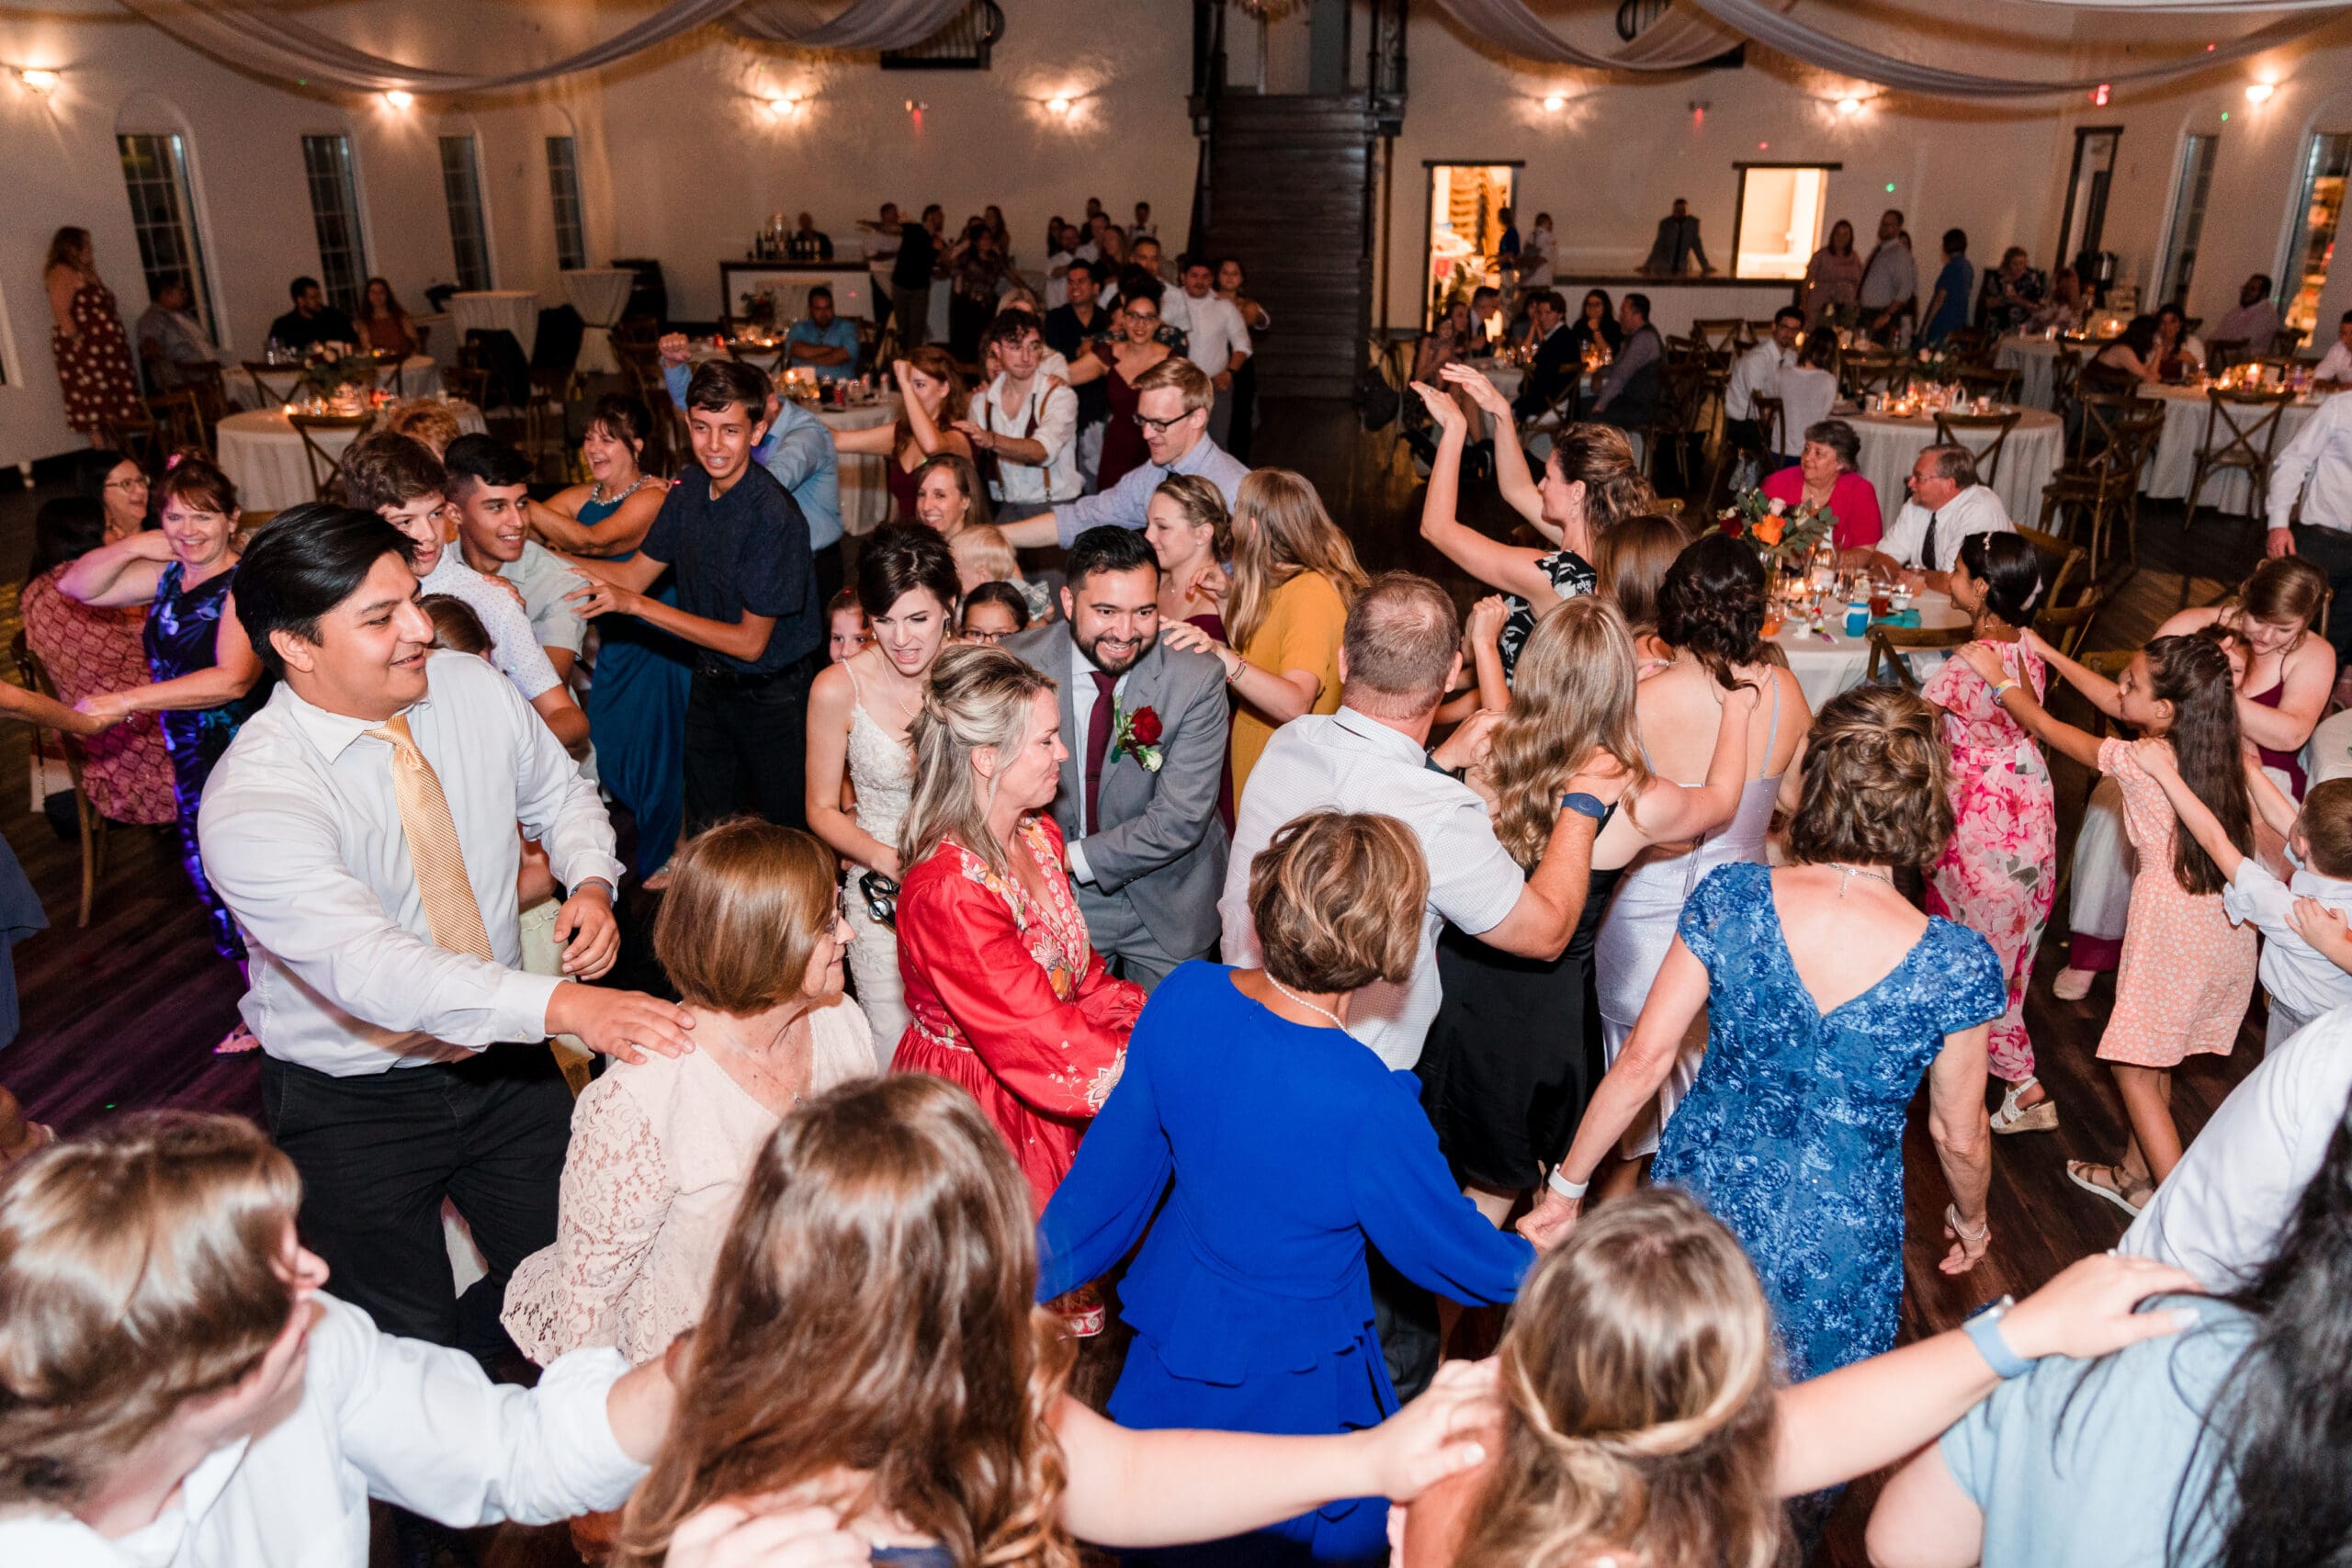 Newlyweds leading a conga line at the wedding reception, with guests joyfully dancing along, at the Sterling Event Venue Reception Center.